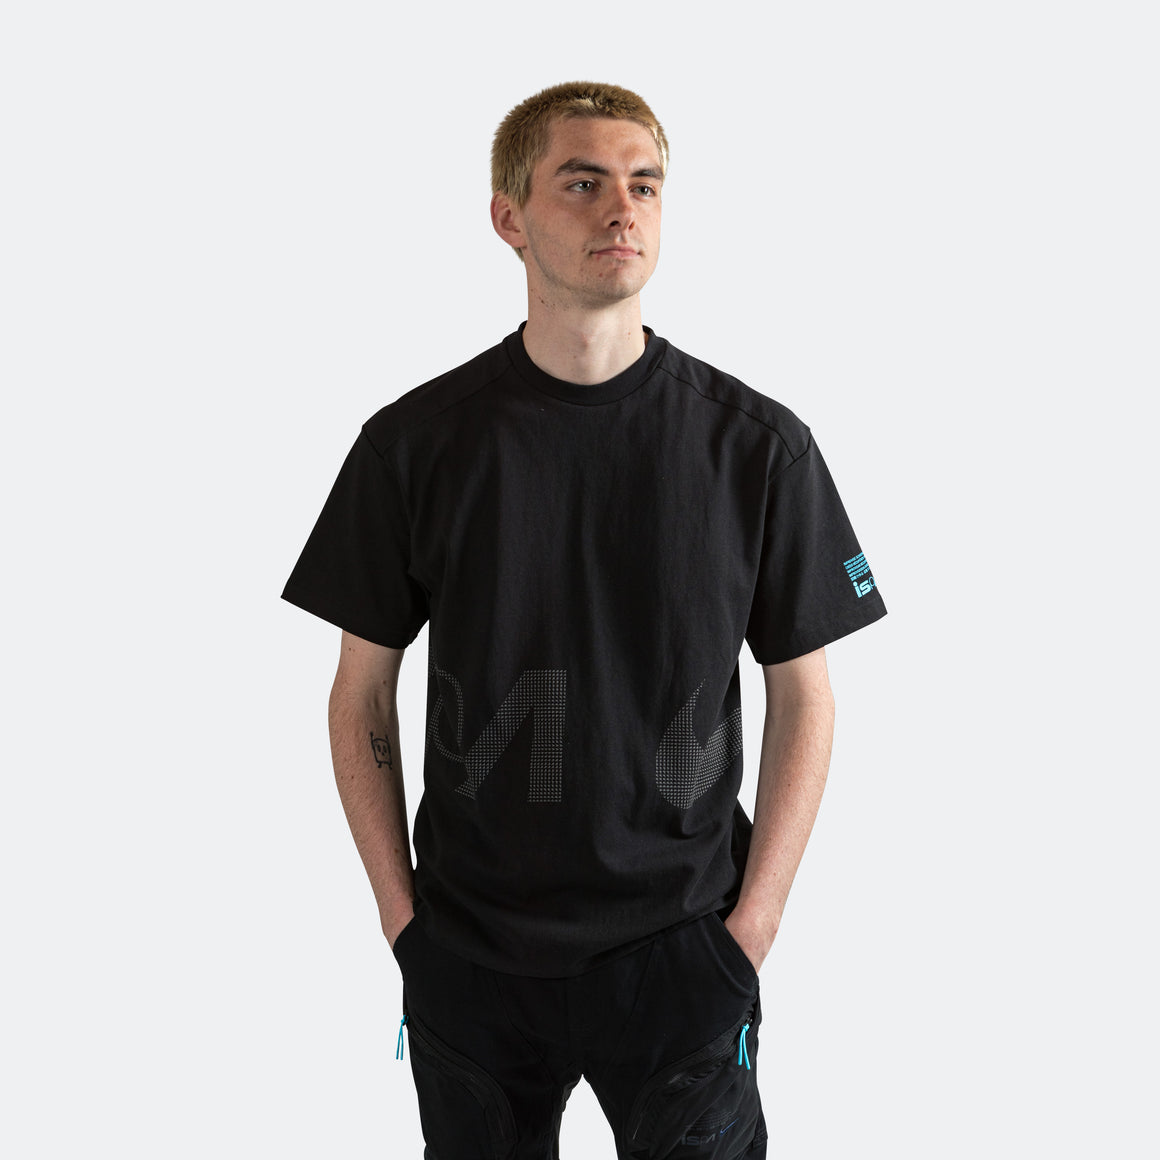 Nike - ISPA SS Tee - Black/Baltic Blue - UP THERE